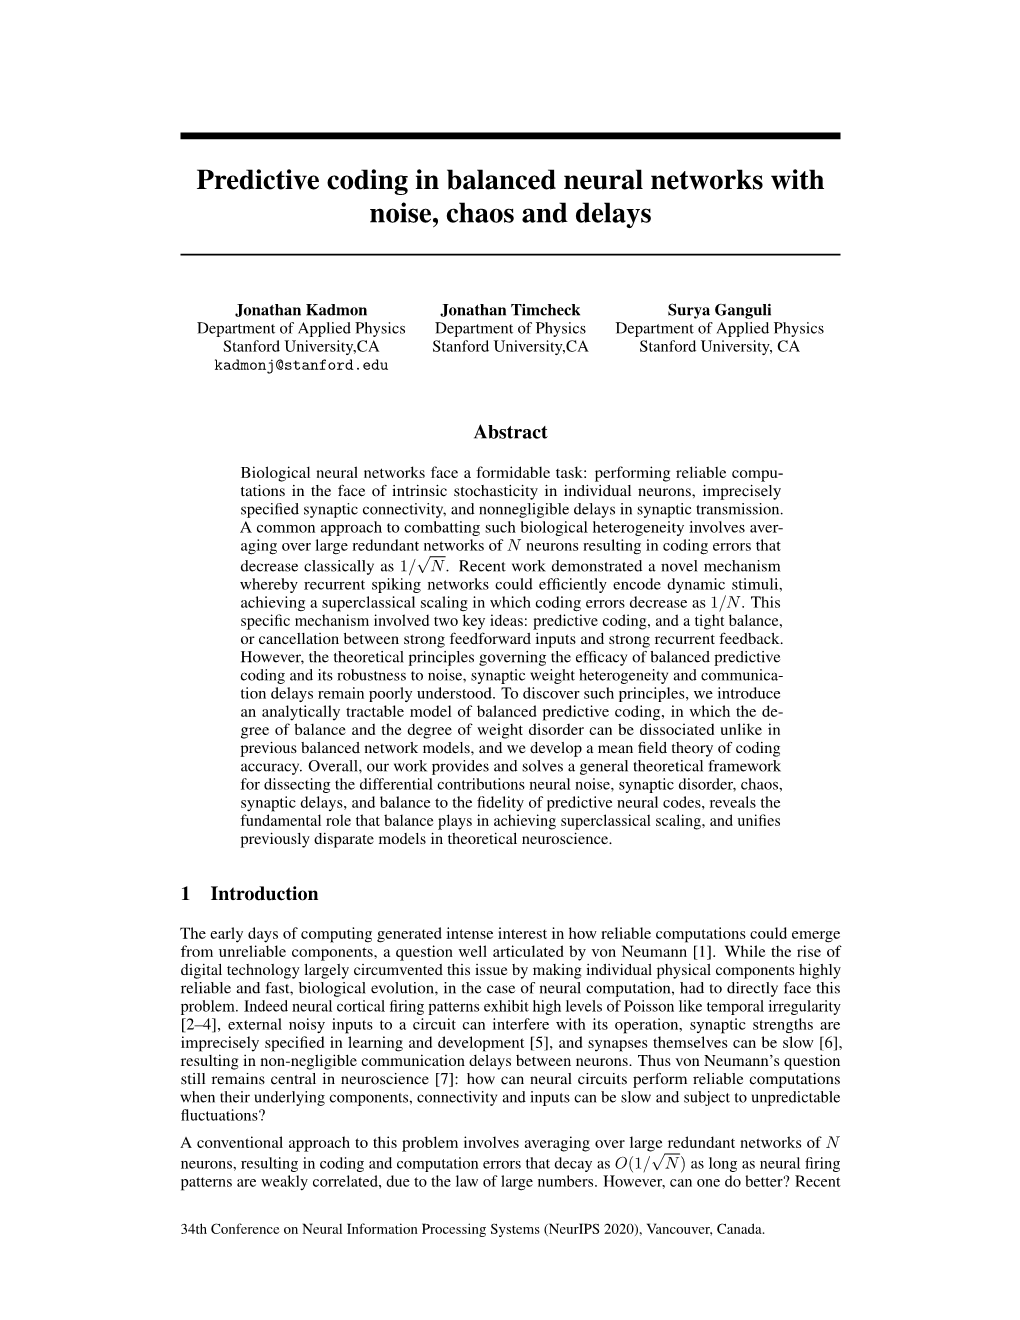 Predictive Coding in Balanced Neural Networks with Noise, Chaos and Delays